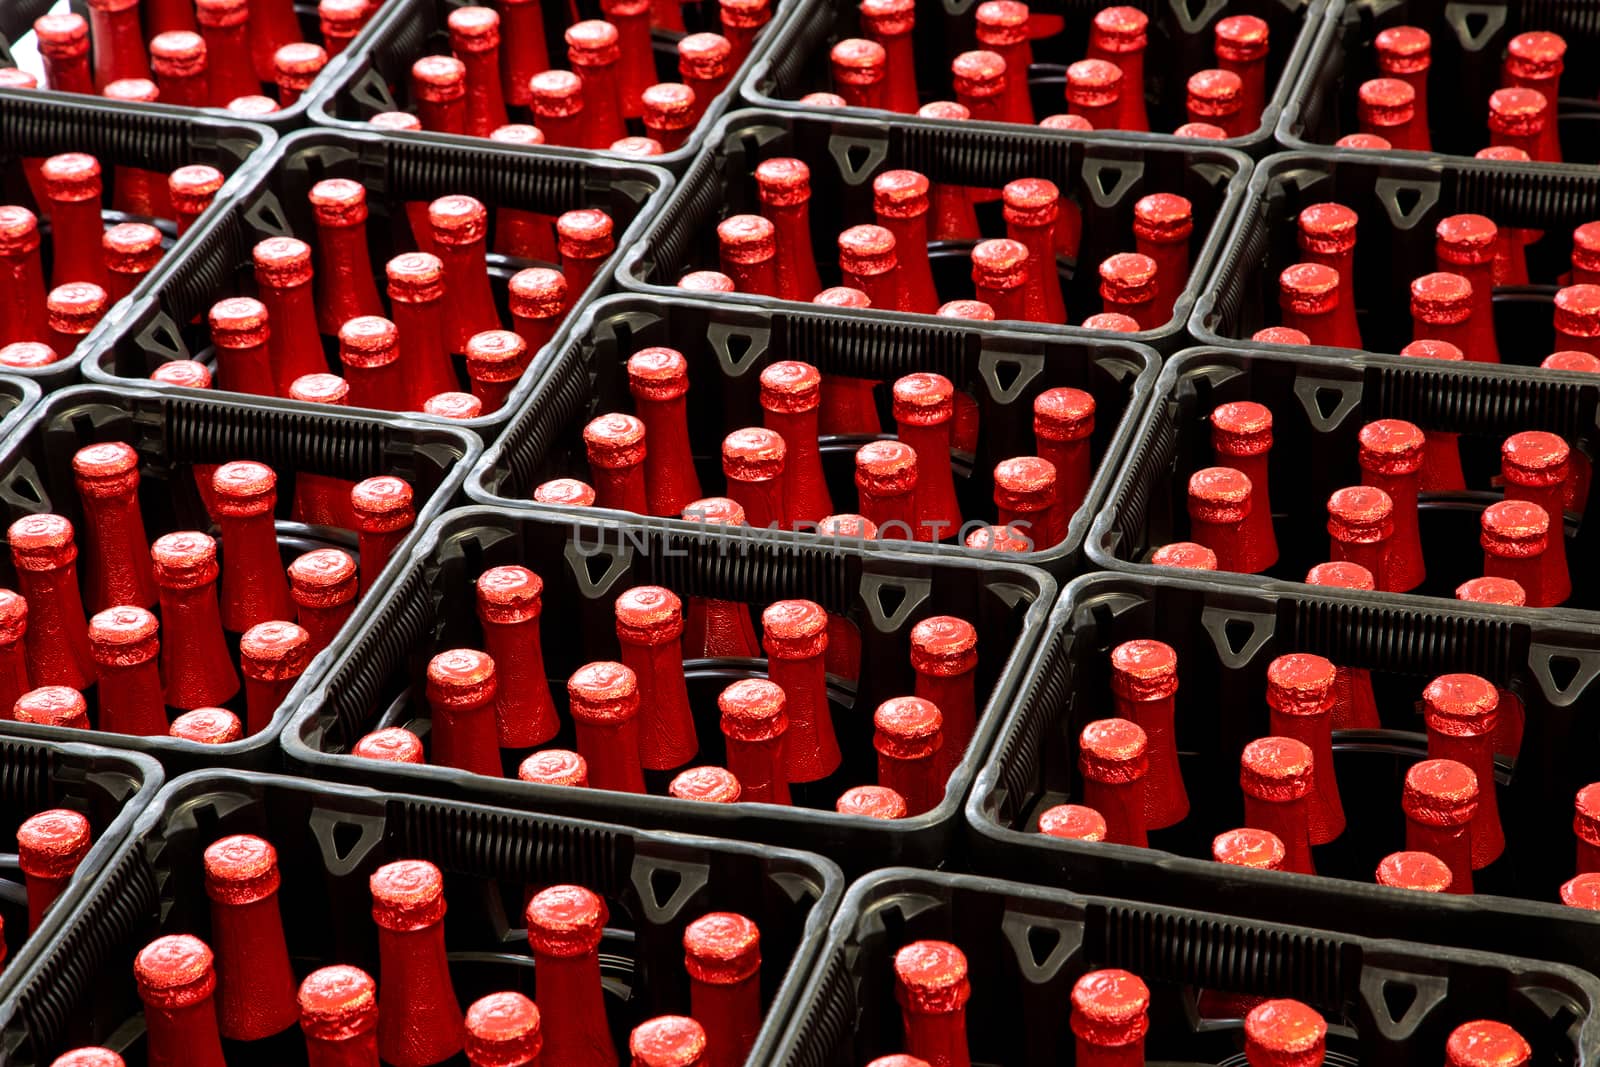 A group of red bottles in beer crates